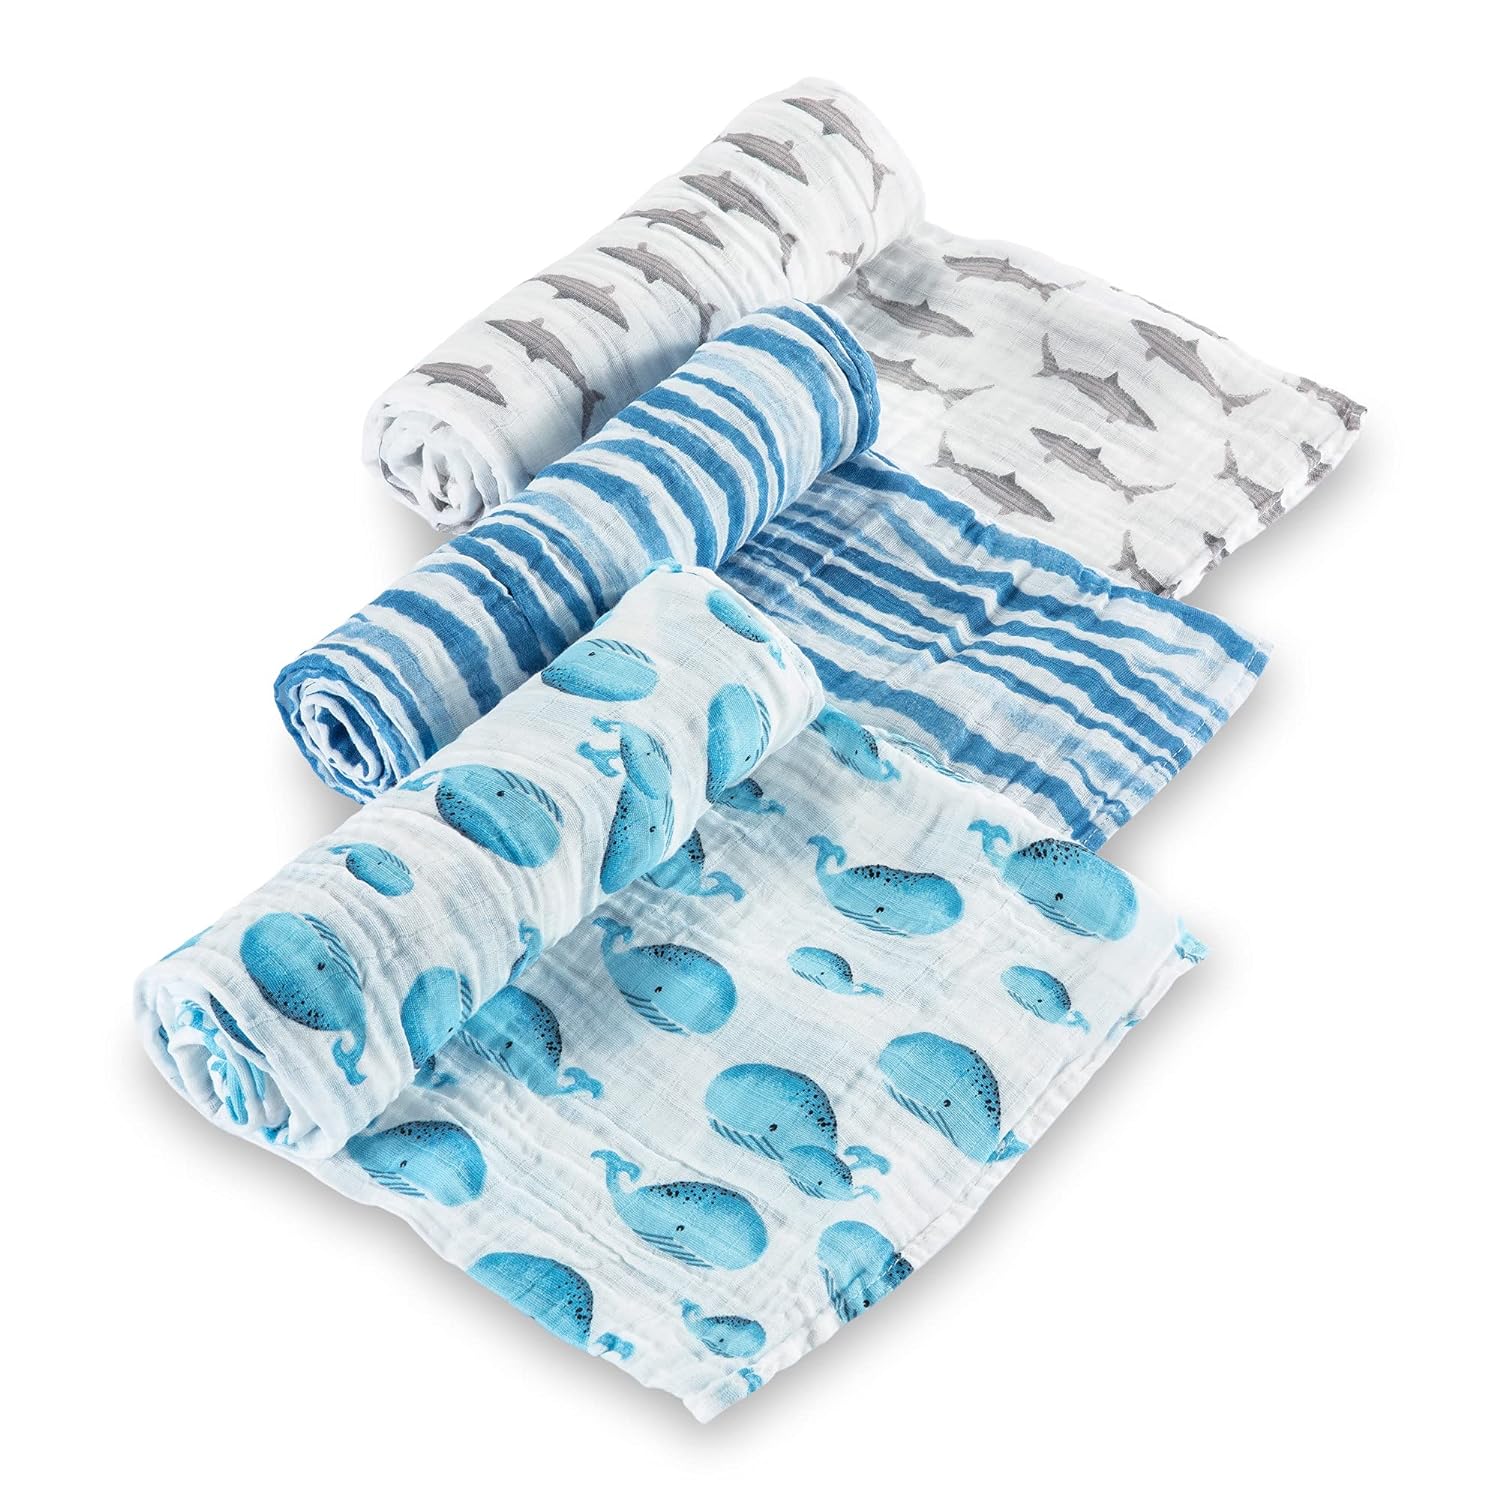 Great Choice Products 100% Cotton Muslin Swaddle Nautical Ocean Baby Blanket Set, Whale And Shark Pattern | Boy Receiving Blankets Pack Of 3 Breath…